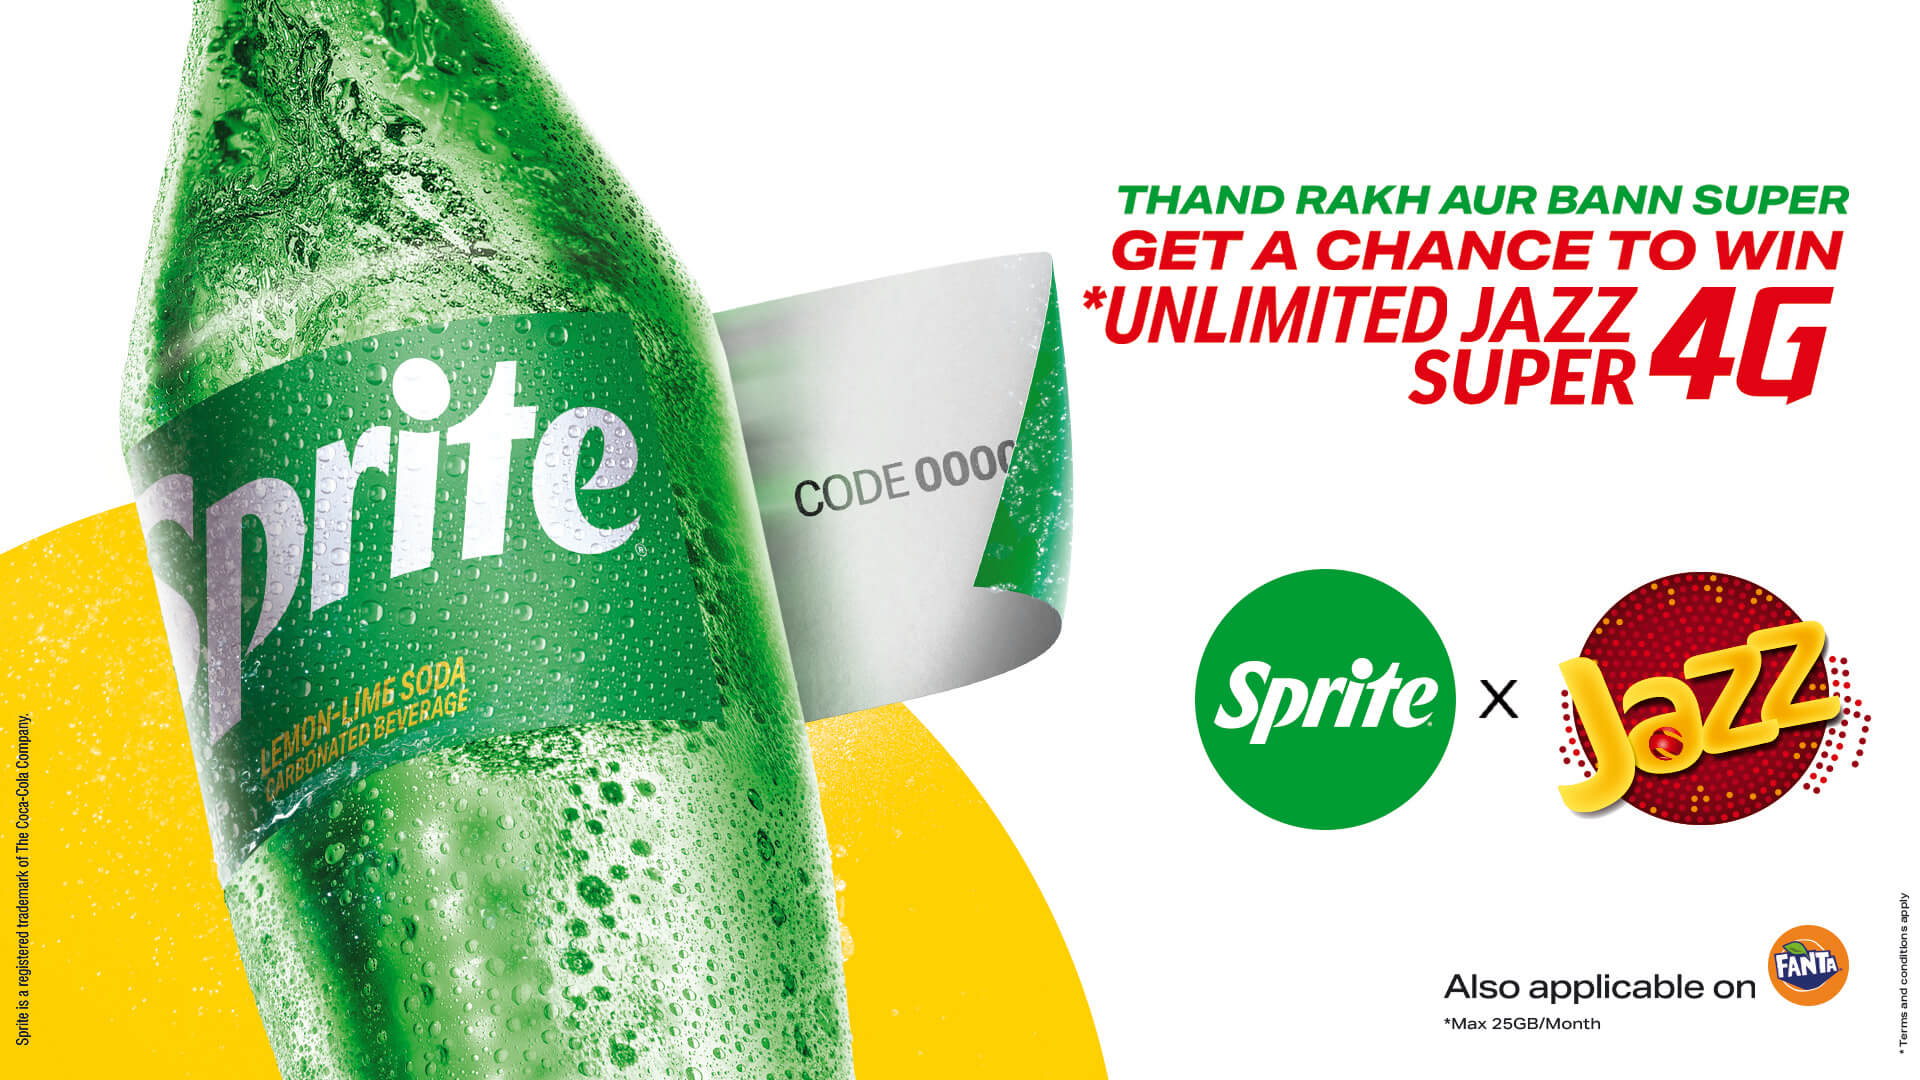 Jazz and Sprite collaborate for a new exciting offer “Thand Rakh Aur Bann Super”